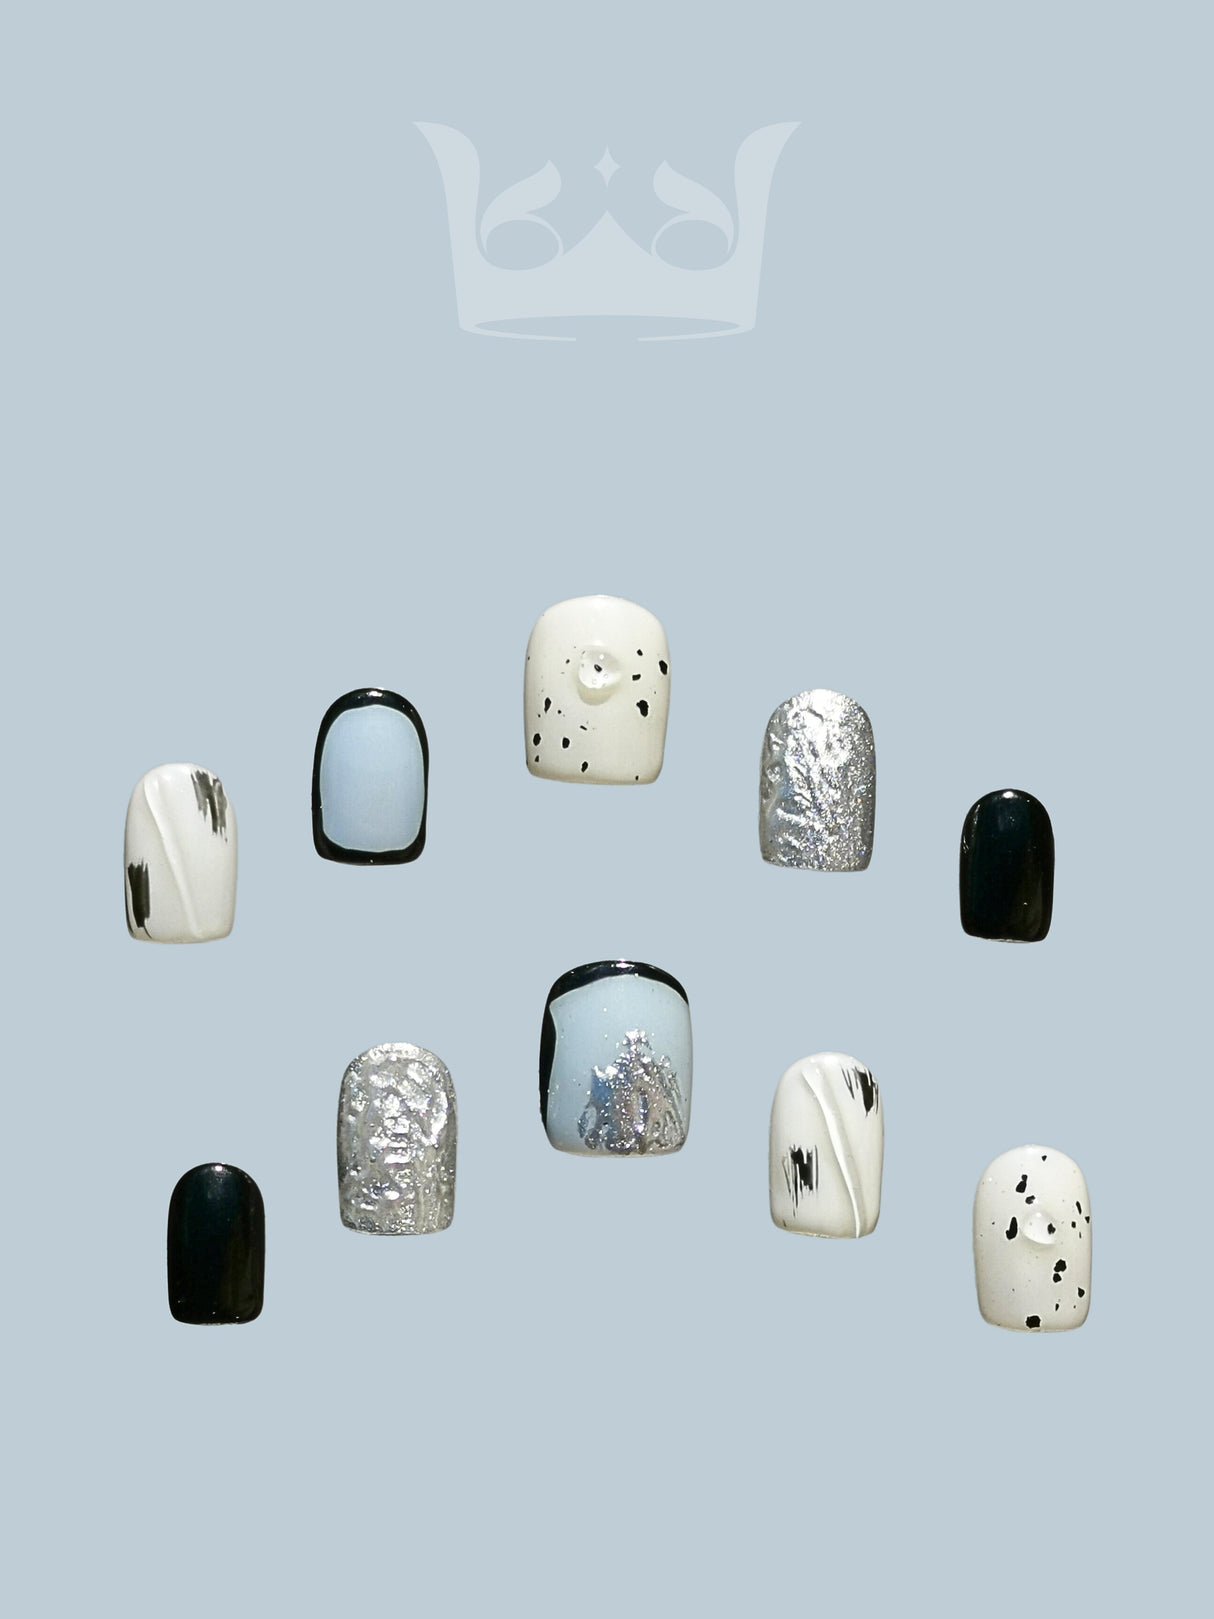 These acrylic nails are designed for fashion and aesthetic purposes, featuring solid colors, metallic accents, and playful patterns for nail art and personal style.